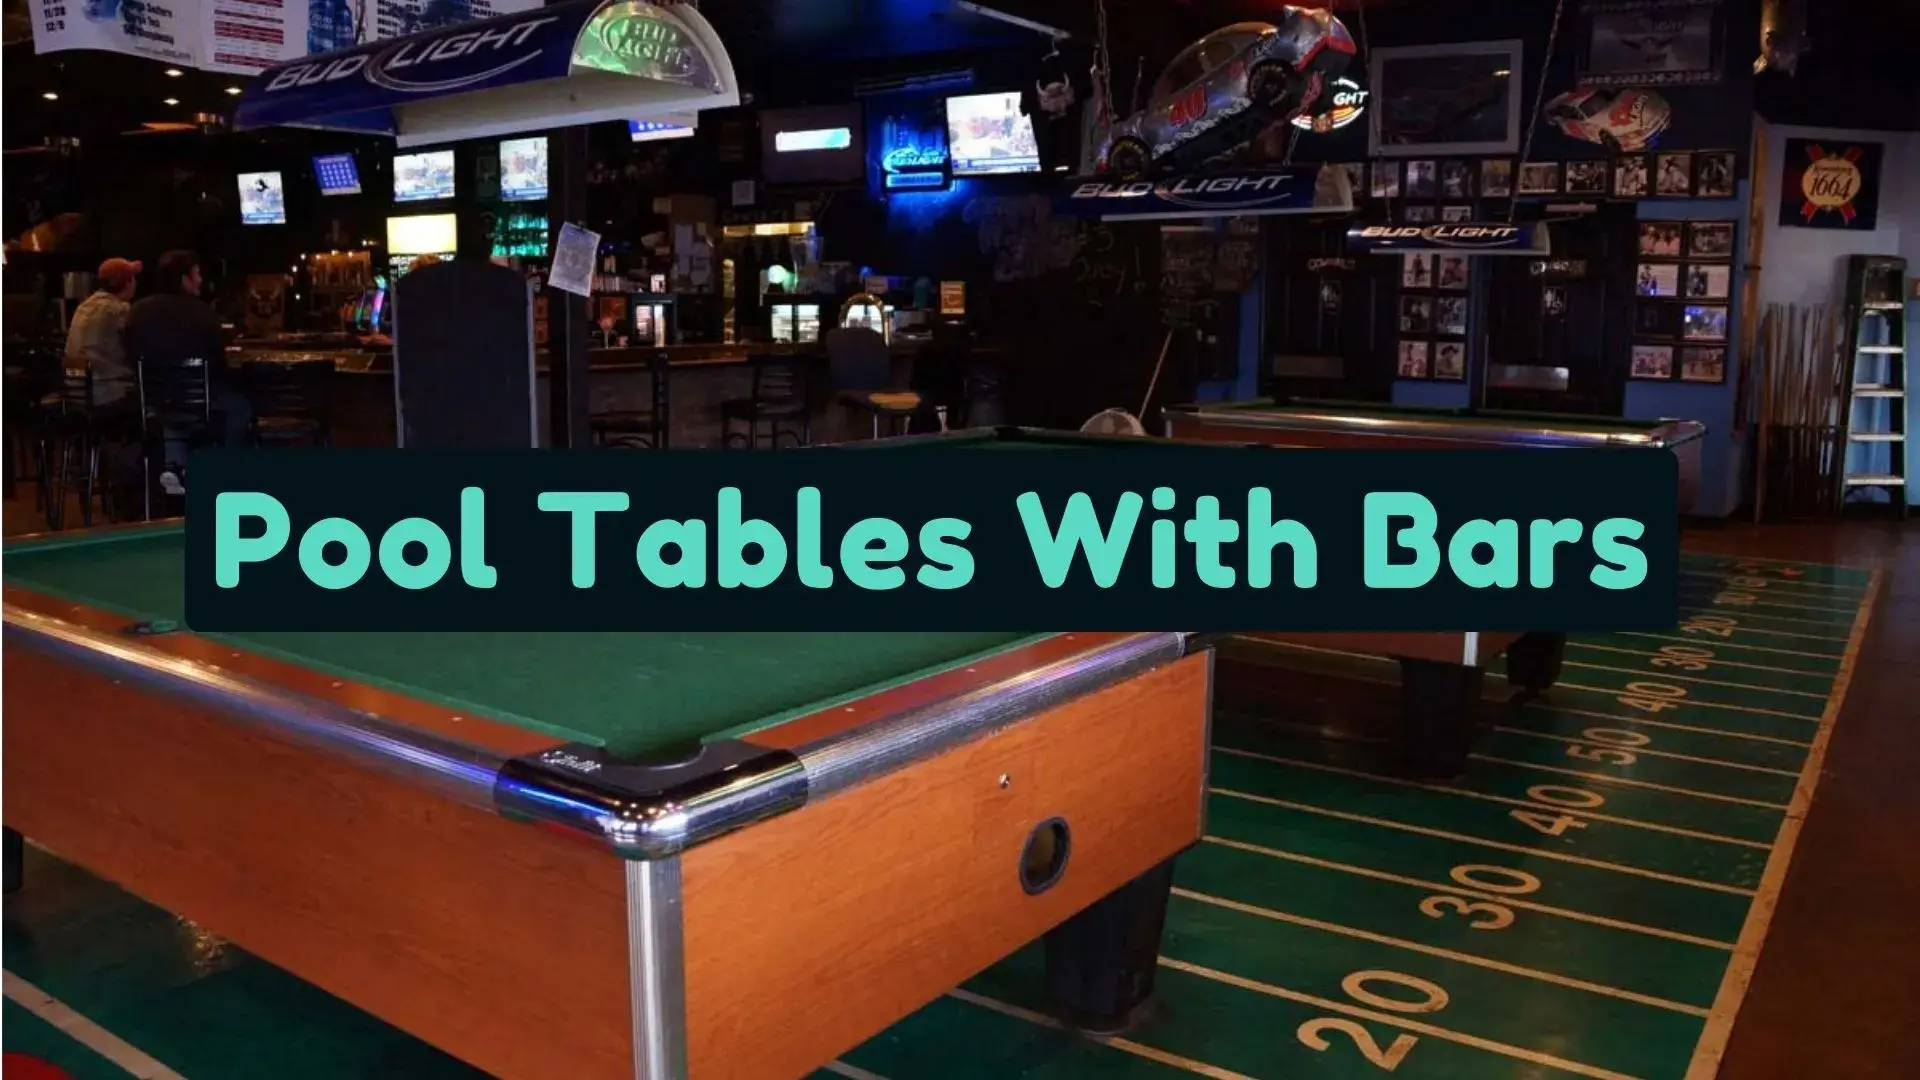 Are You Looking For Closest Pool Table Bars Near You | Then Read This Comprehensive Guide To Discover Best Bars With Tables Pool Near Me.